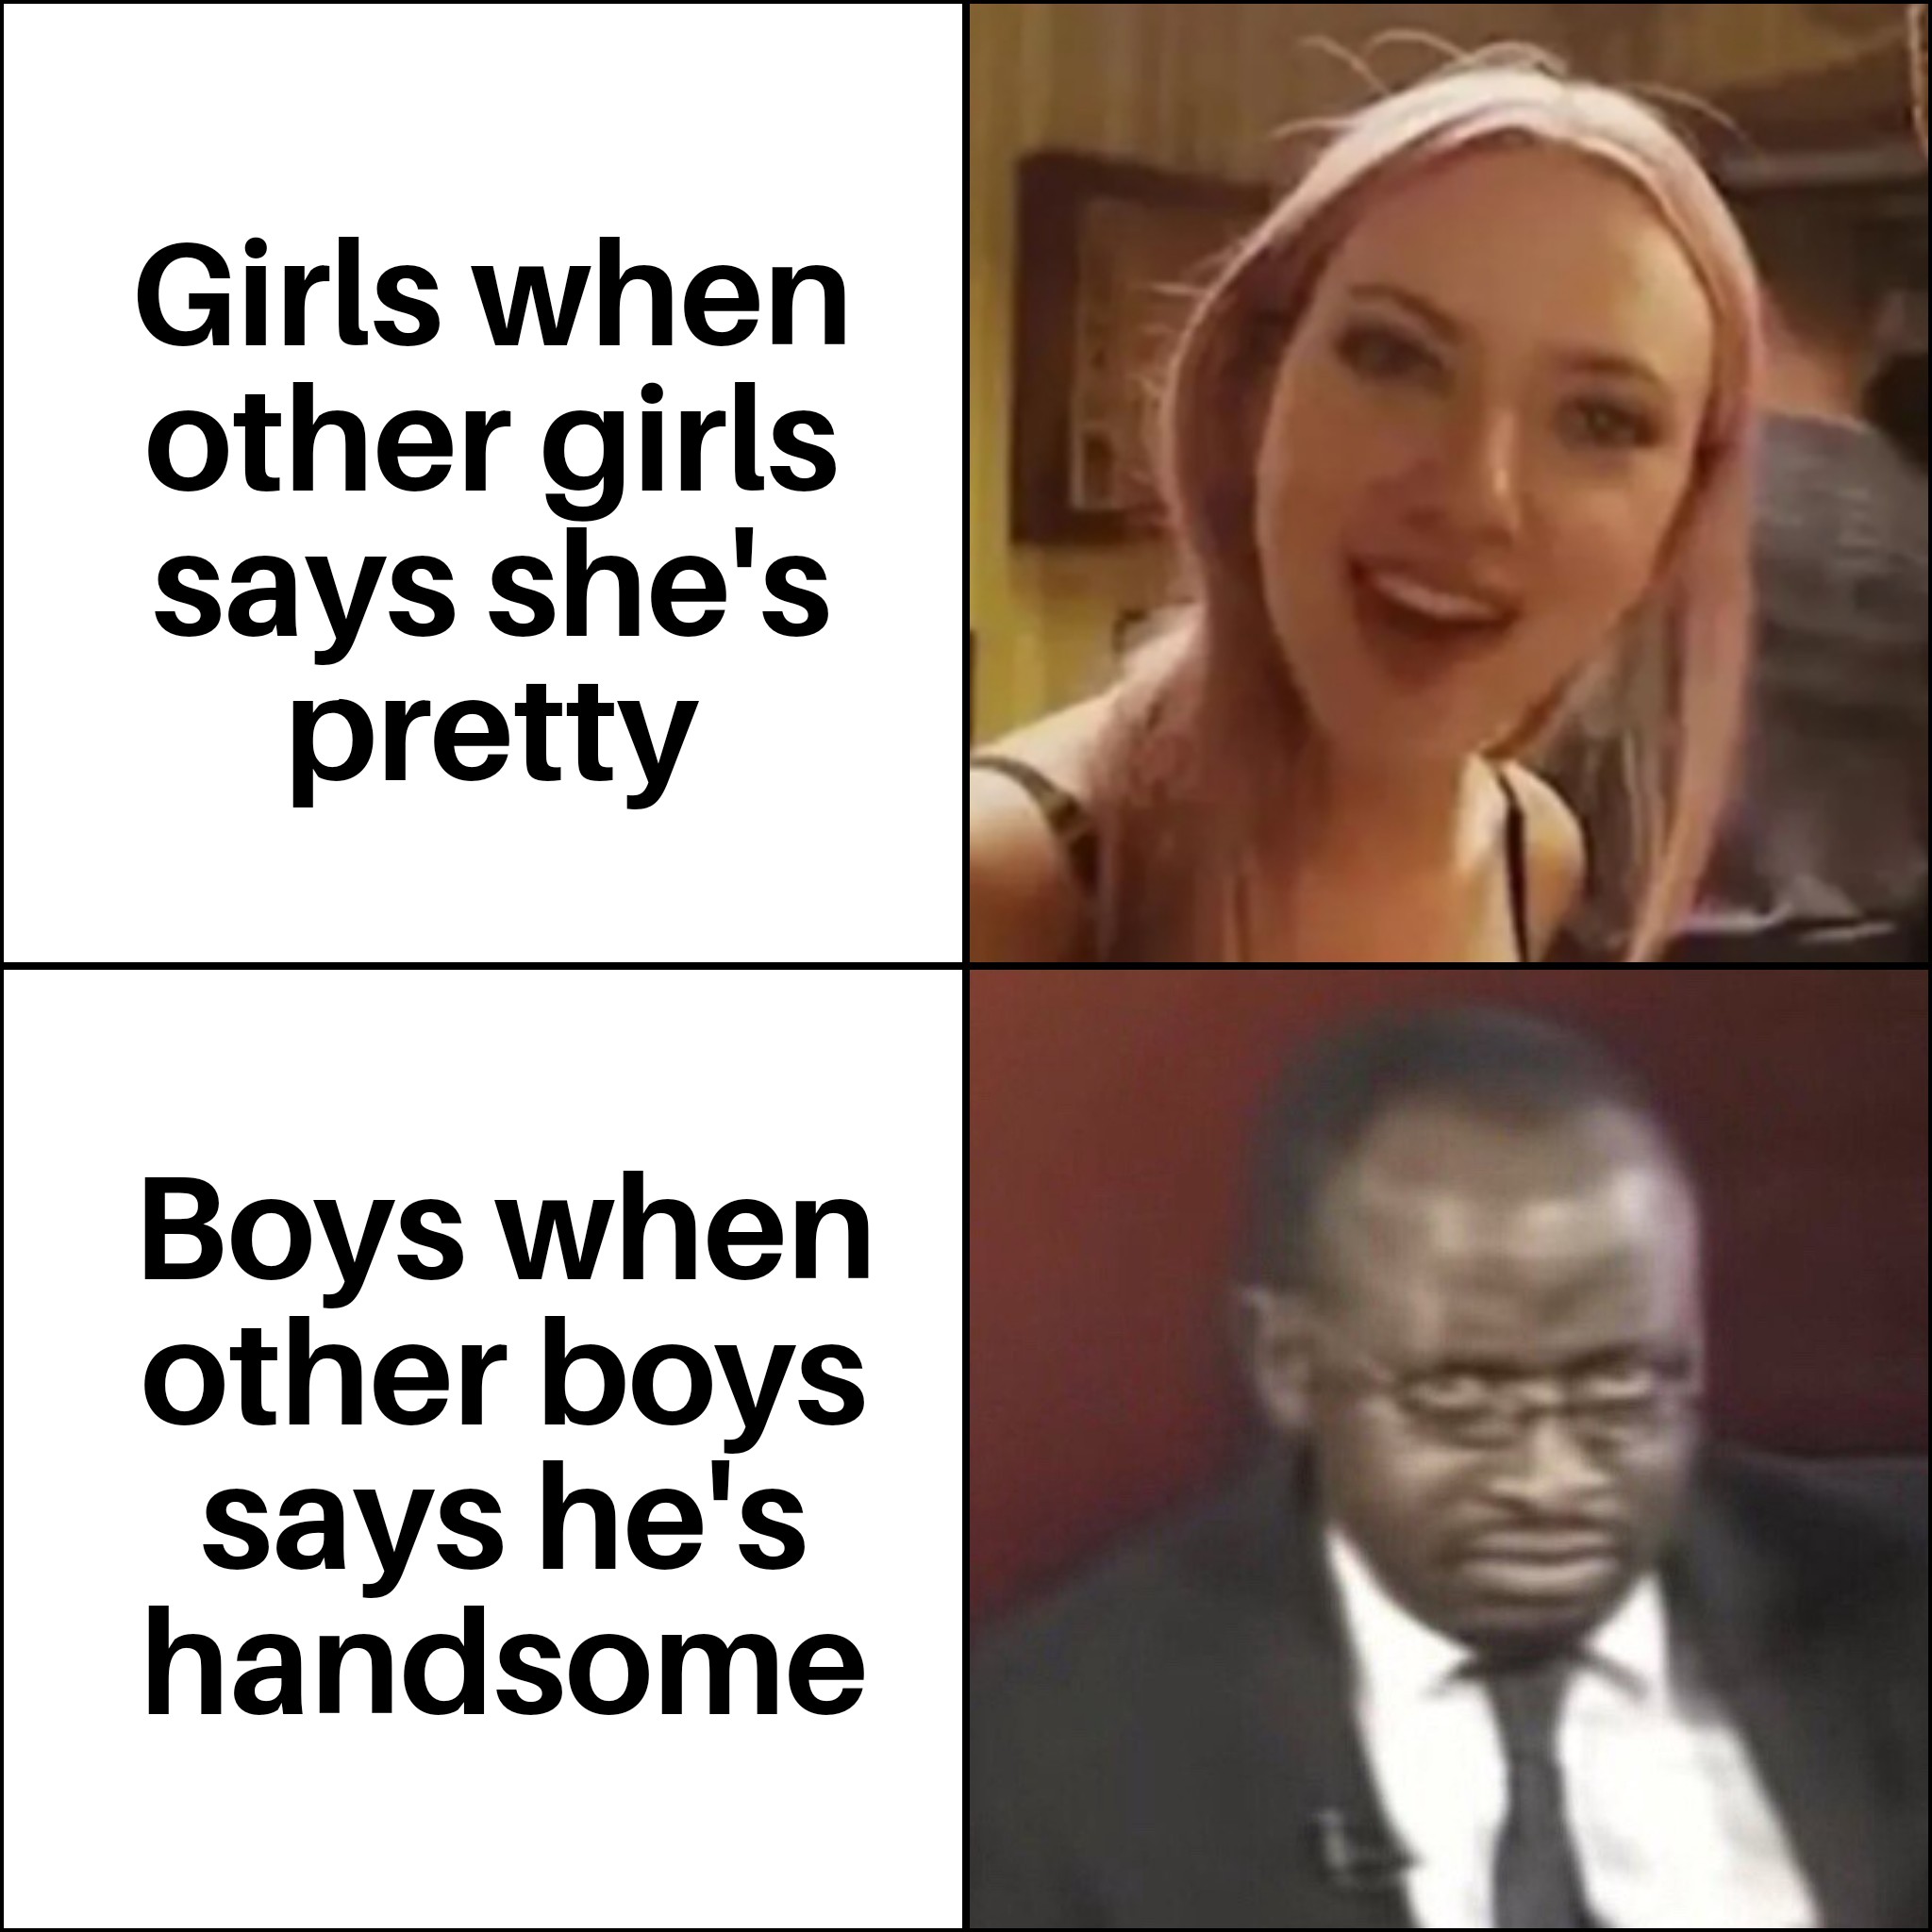 dank memes - funny memes - скарлетт йоханссон мем - Girls when other girls says she's pretty Boys when other boys says he's handsome